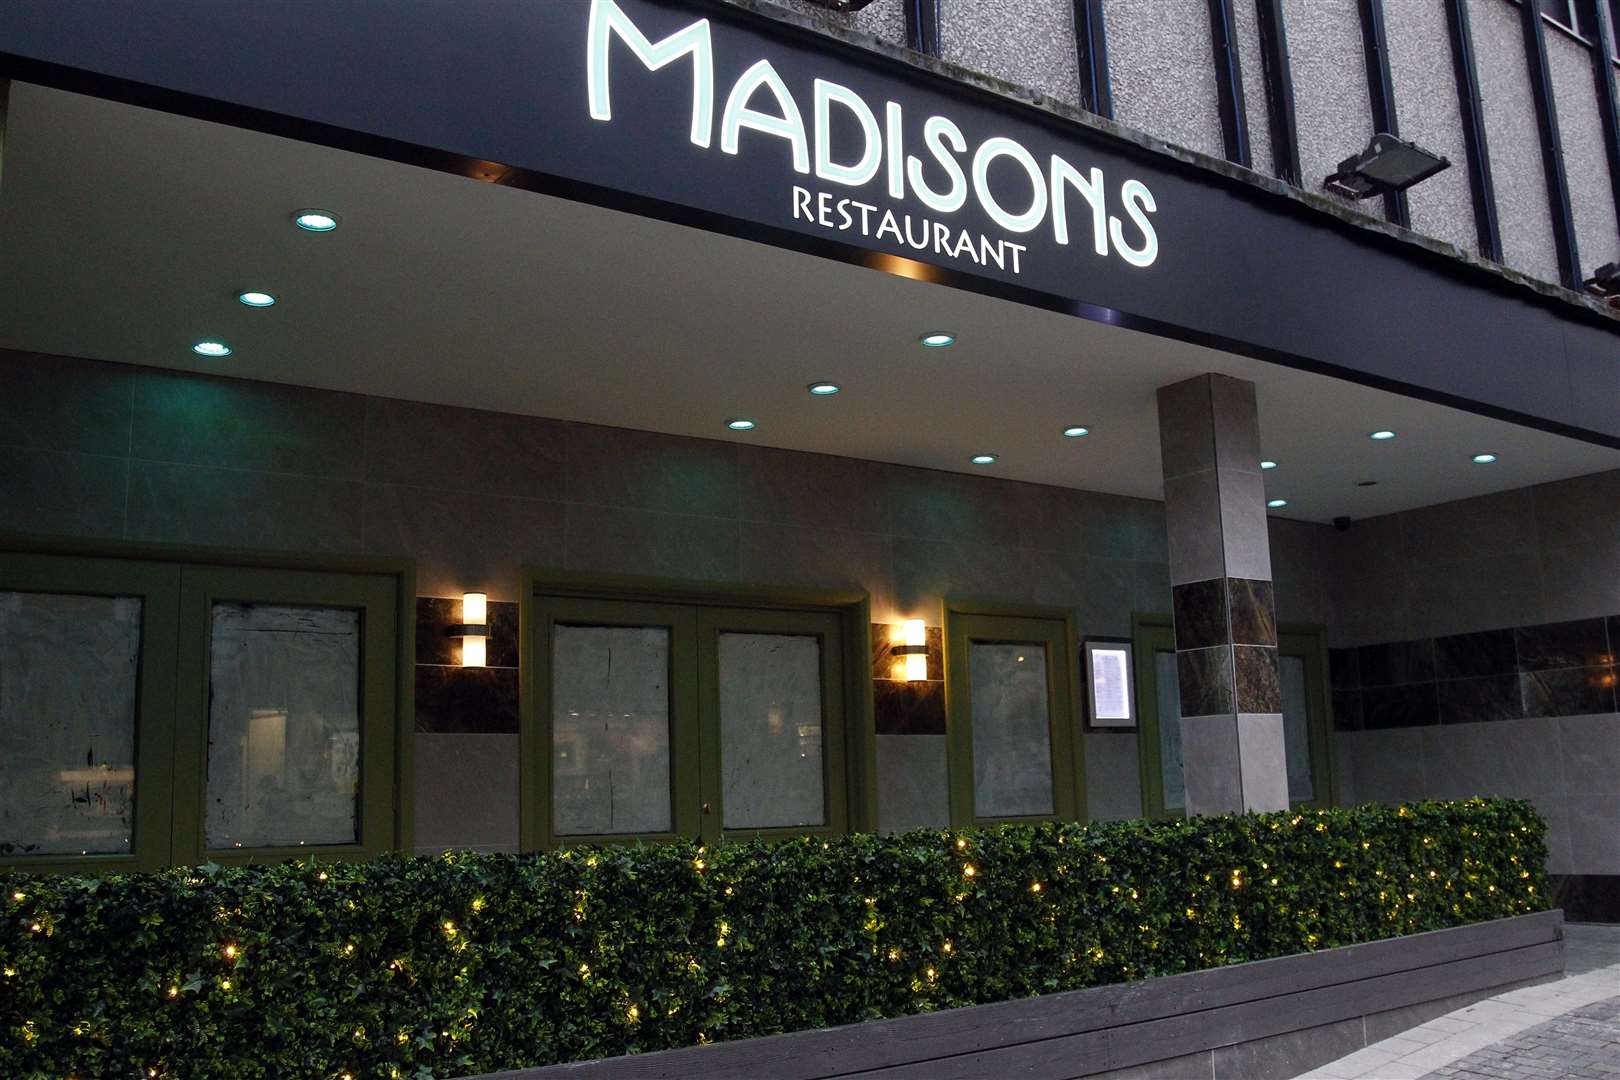 Madisons Restaurant and bar shut without explanation on Monday, August 1